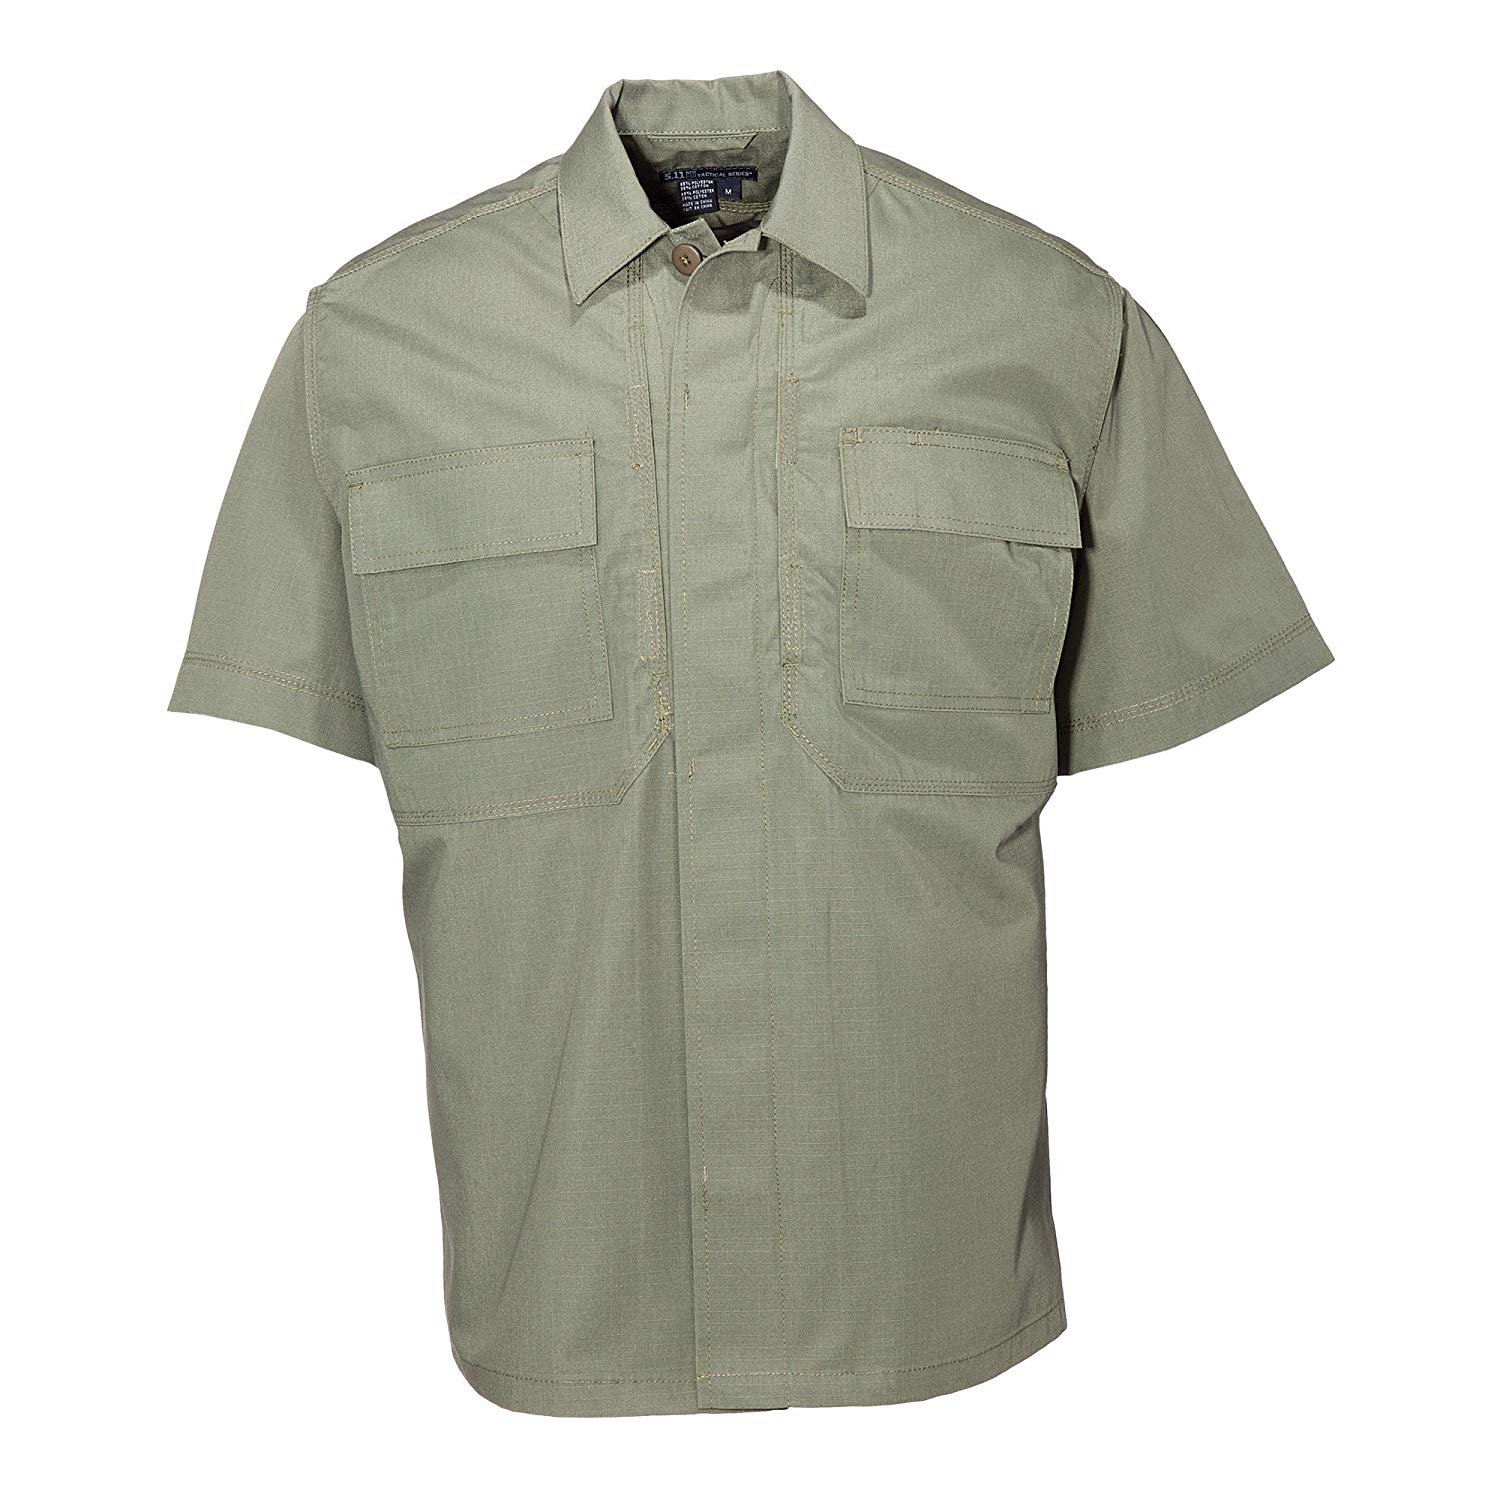 Style 71339T Breathable and Treated Fabric 5.11 Tactical Men's TDU Short Sleeve Polo Shirt